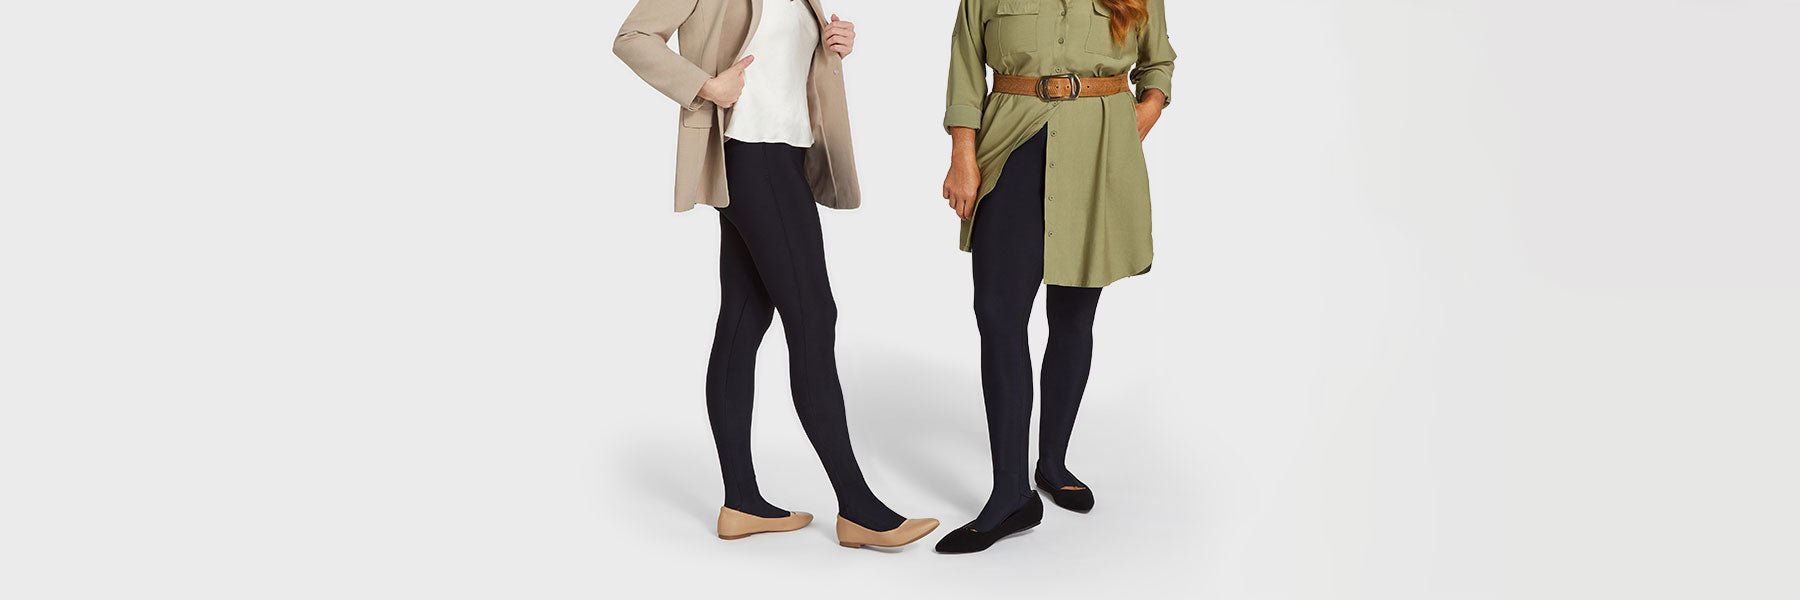 The Marena Group Releases Innovative Everyday Management Leggings For Lipedema Patients